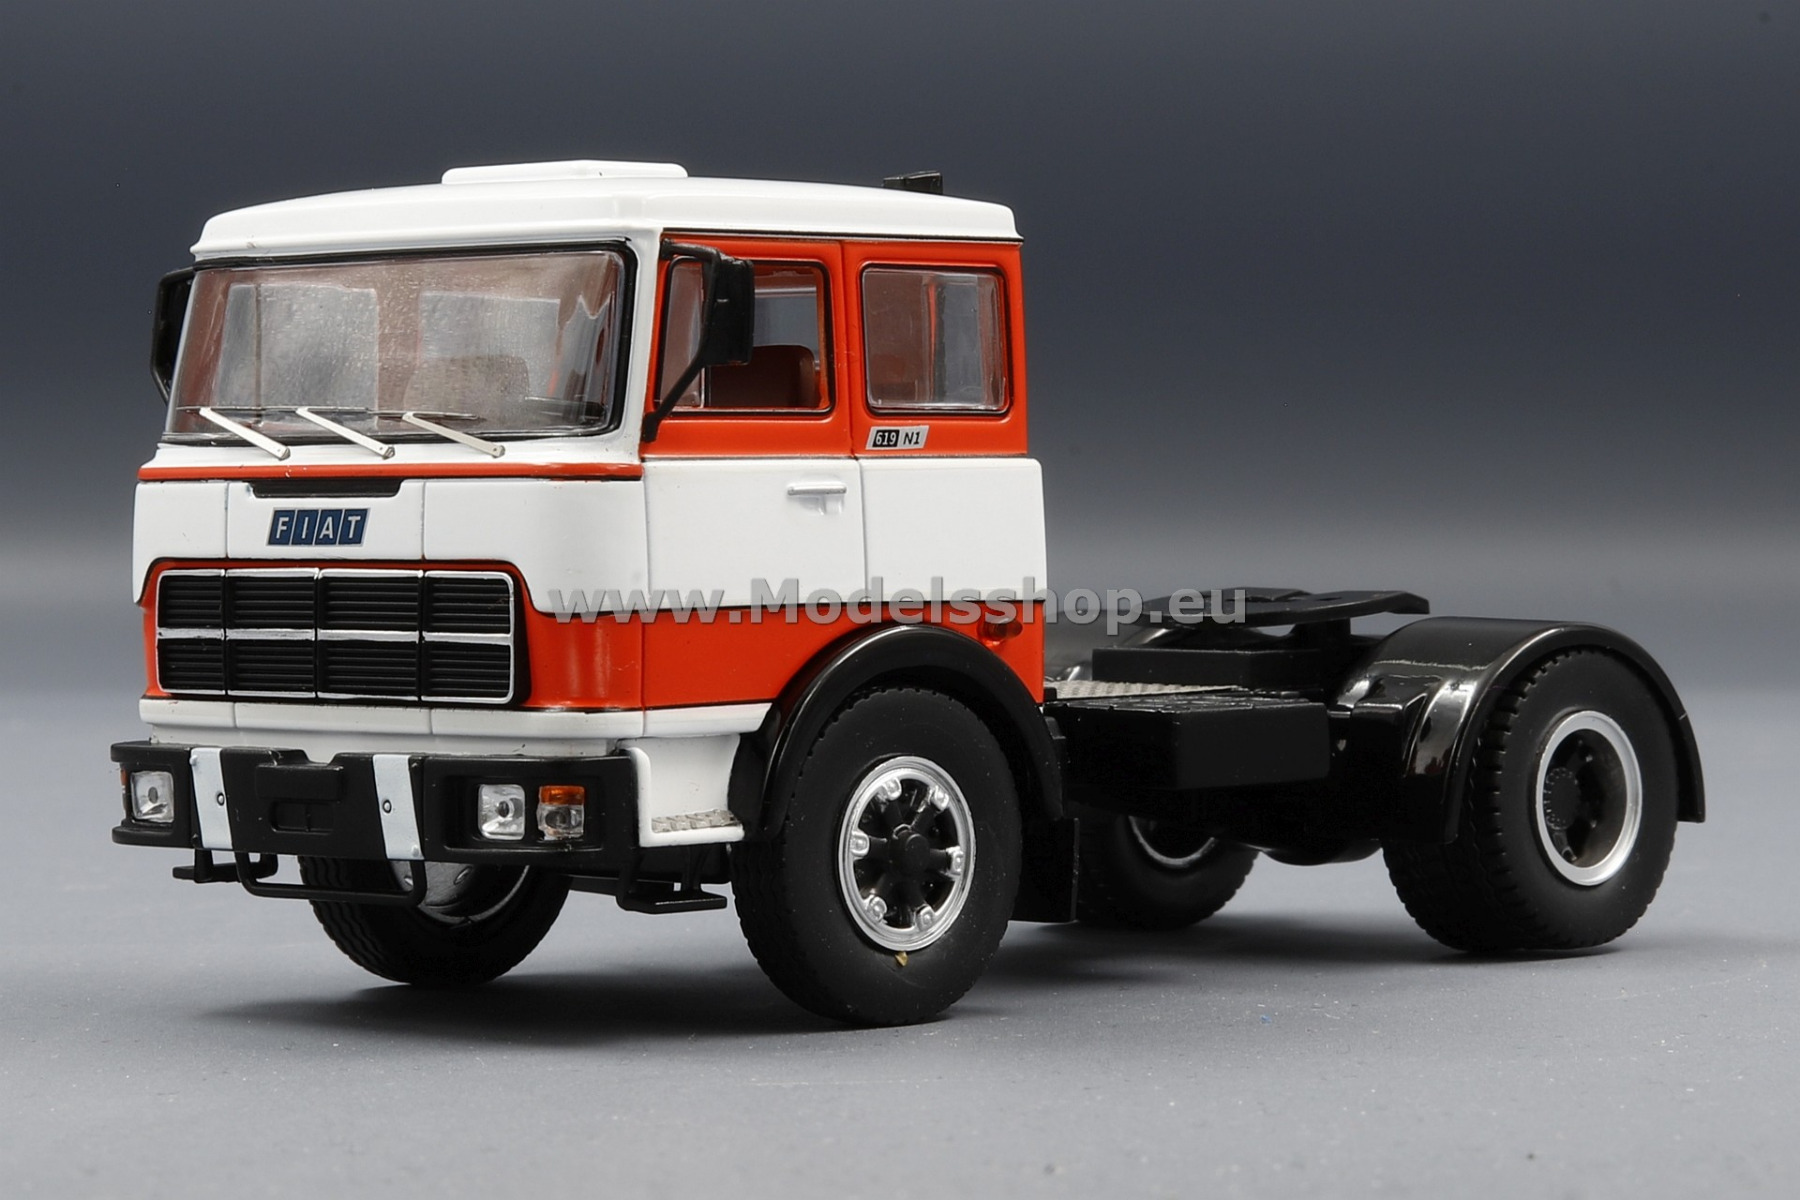 IXO TR093 Fiat 619 N1 tractor truck, 1980 /white - light red/